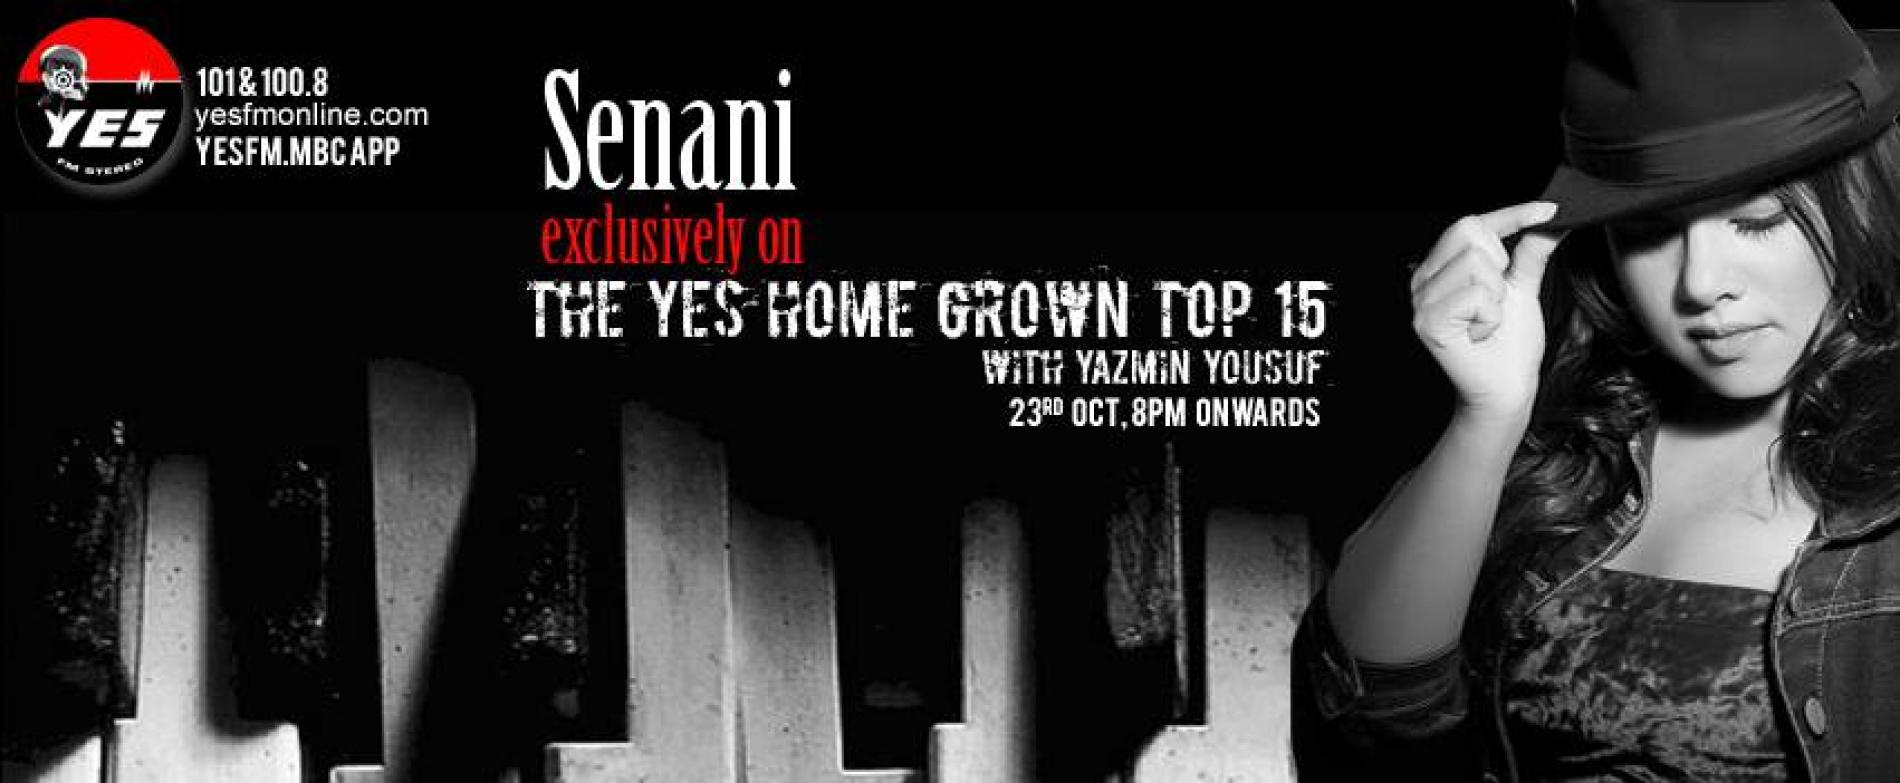 Senani On The YES Home Grown Top 15 Tonight